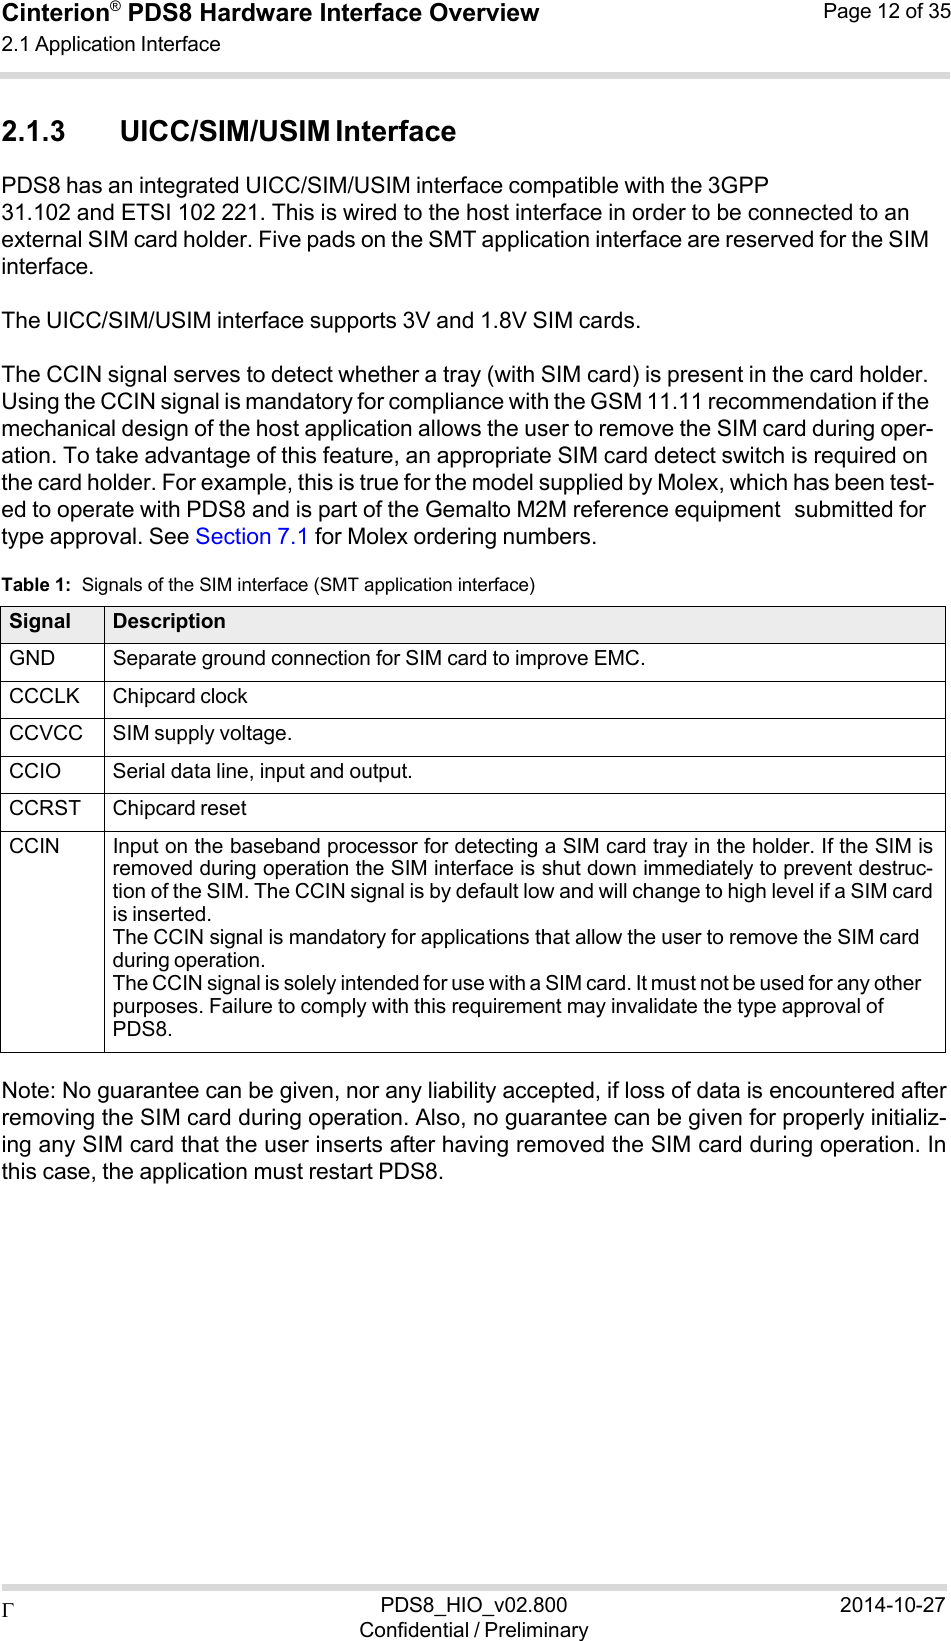  PDS8_HIO_v02.800Confidential / Preliminary2014-10-27Cinterion®  PDS8 Hardware Interface Overview 2.1 Application Interface Page 12 of 35   2.1.3 UICC/SIM/USIM Interface PDS8 has an integrated UICC/SIM/USIM interface compatible with the 3GPP 31.102 and ETSI 102 221. This is wired to the host interface in order to be connected to an external SIM card holder. Five pads on the SMT application interface are reserved for the SIM interface.  The UICC/SIM/USIM interface supports 3V and 1.8V SIM cards.  The CCIN signal serves to detect whether a tray (with SIM card) is present in the card holder. Using the CCIN signal is mandatory for compliance with the GSM 11.11 recommendation if the mechanical design of the host application allows the user to remove the SIM card during oper- ation. To take advantage of this feature, an appropriate SIM card detect switch is required on the card holder. For example, this is true for the model supplied by Molex, which has been test- ed to operate with PDS8 and is part of the Gemalto M2M reference equipment submitted for type approval. See Section 7.1 for Molex ordering numbers.  Table 1:  Signals of the SIM interface (SMT application interface)  Signal DescriptionGND Separate ground connection for SIM card to improve EMC.CCCLK Chipcard clock CCVCC SIM supply voltage. CCIO Serial data line, input and output.CCRST Chipcard reset CCIN Input on the baseband processor for detecting a SIM card tray in the holder. If the SIM is removed during operation the SIM interface is shut down immediately to prevent destruc-tion of the SIM. The CCIN signal is by default low and will change to high level if a SIM card is inserted. The CCIN signal is mandatory for applications that allow the user to remove the SIM card during operation. The CCIN signal is solely intended for use with a SIM card. It must not be used for any other purposes. Failure to comply with this requirement may invalidate the type approval of PDS8.  Note: No guarantee can be given, nor any liability accepted, if loss of data is encountered after removing the SIM card during operation. Also, no guarantee can be given for properly initializ- ing any SIM card that the user inserts after having removed the SIM card during operation. In this case, the application must restart PDS8. 